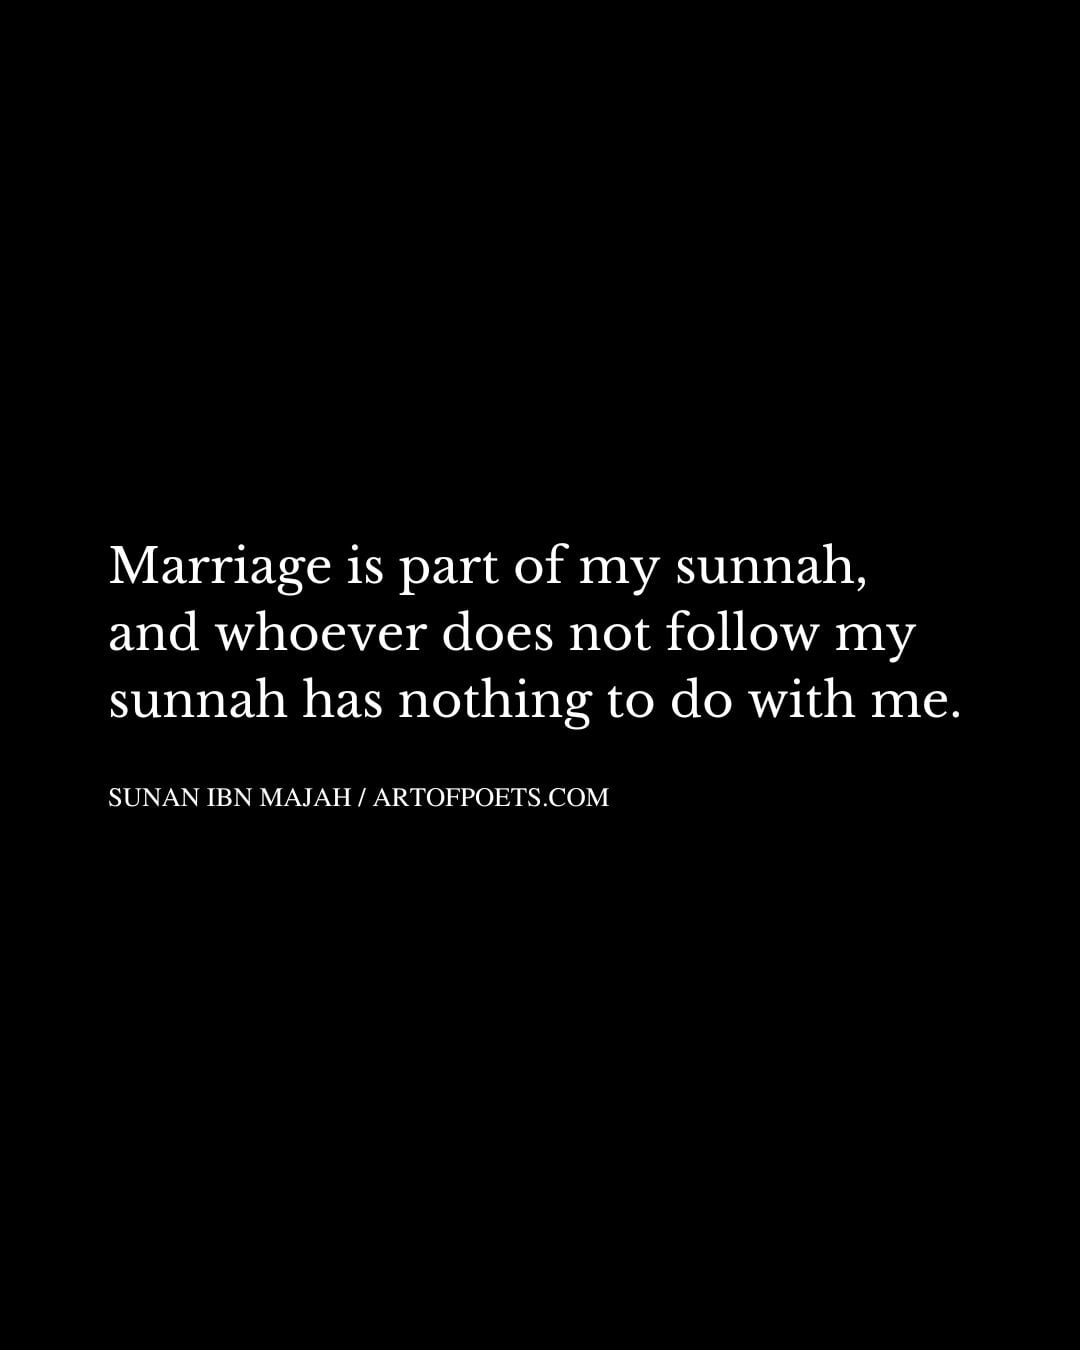 Marriage is part of my sunnah and whoever does not follow my sunnah has nothing to do with me